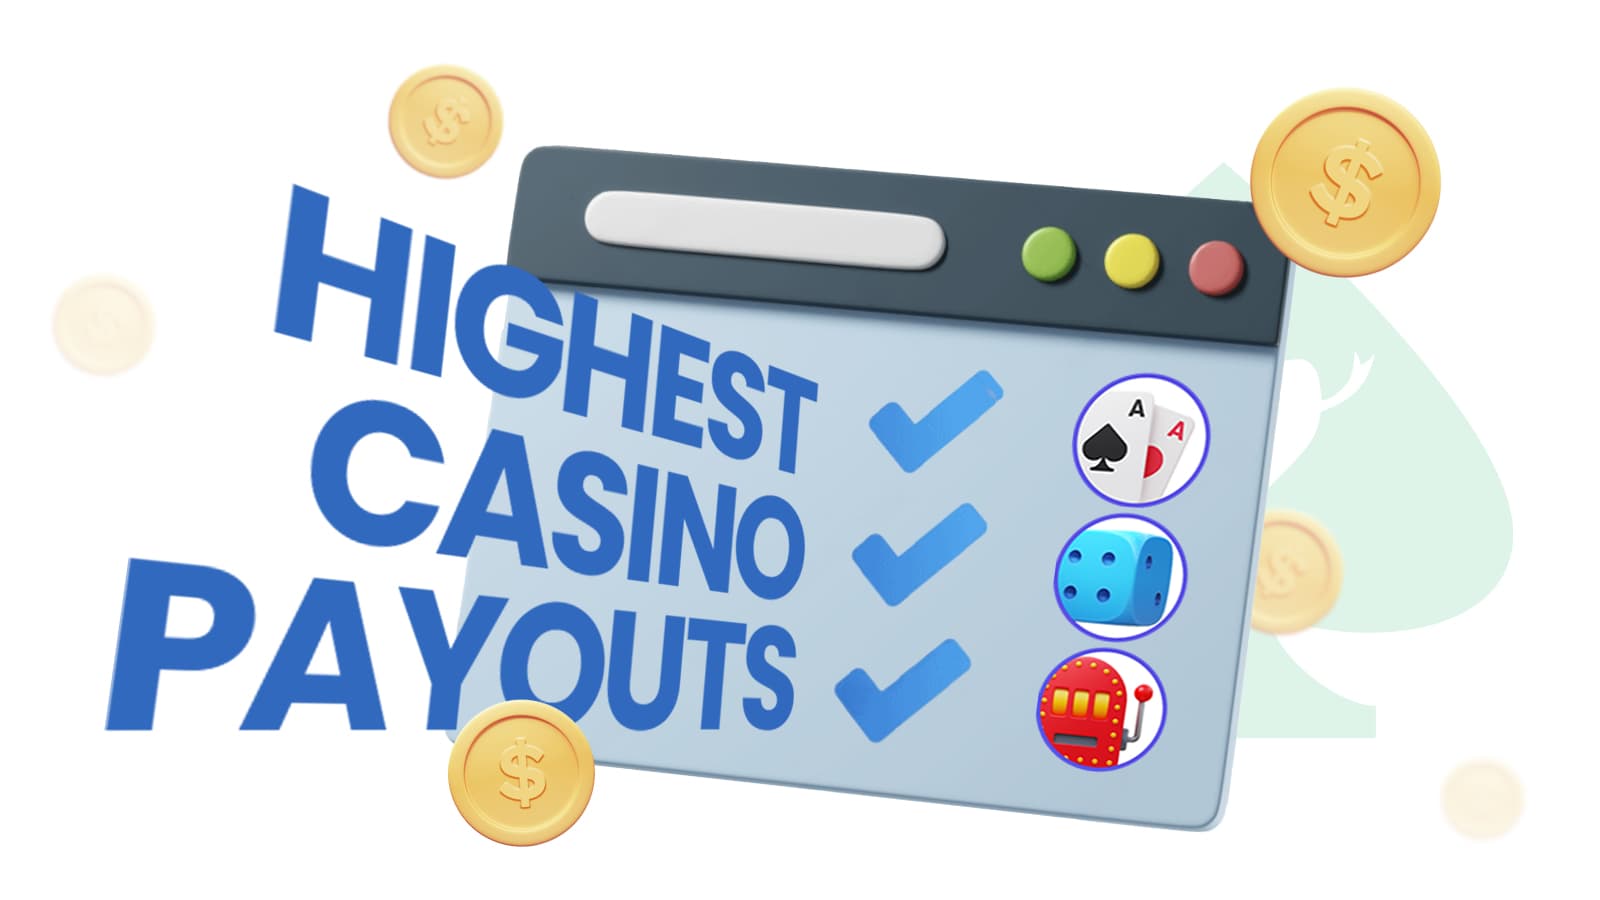 Highest casino payouts